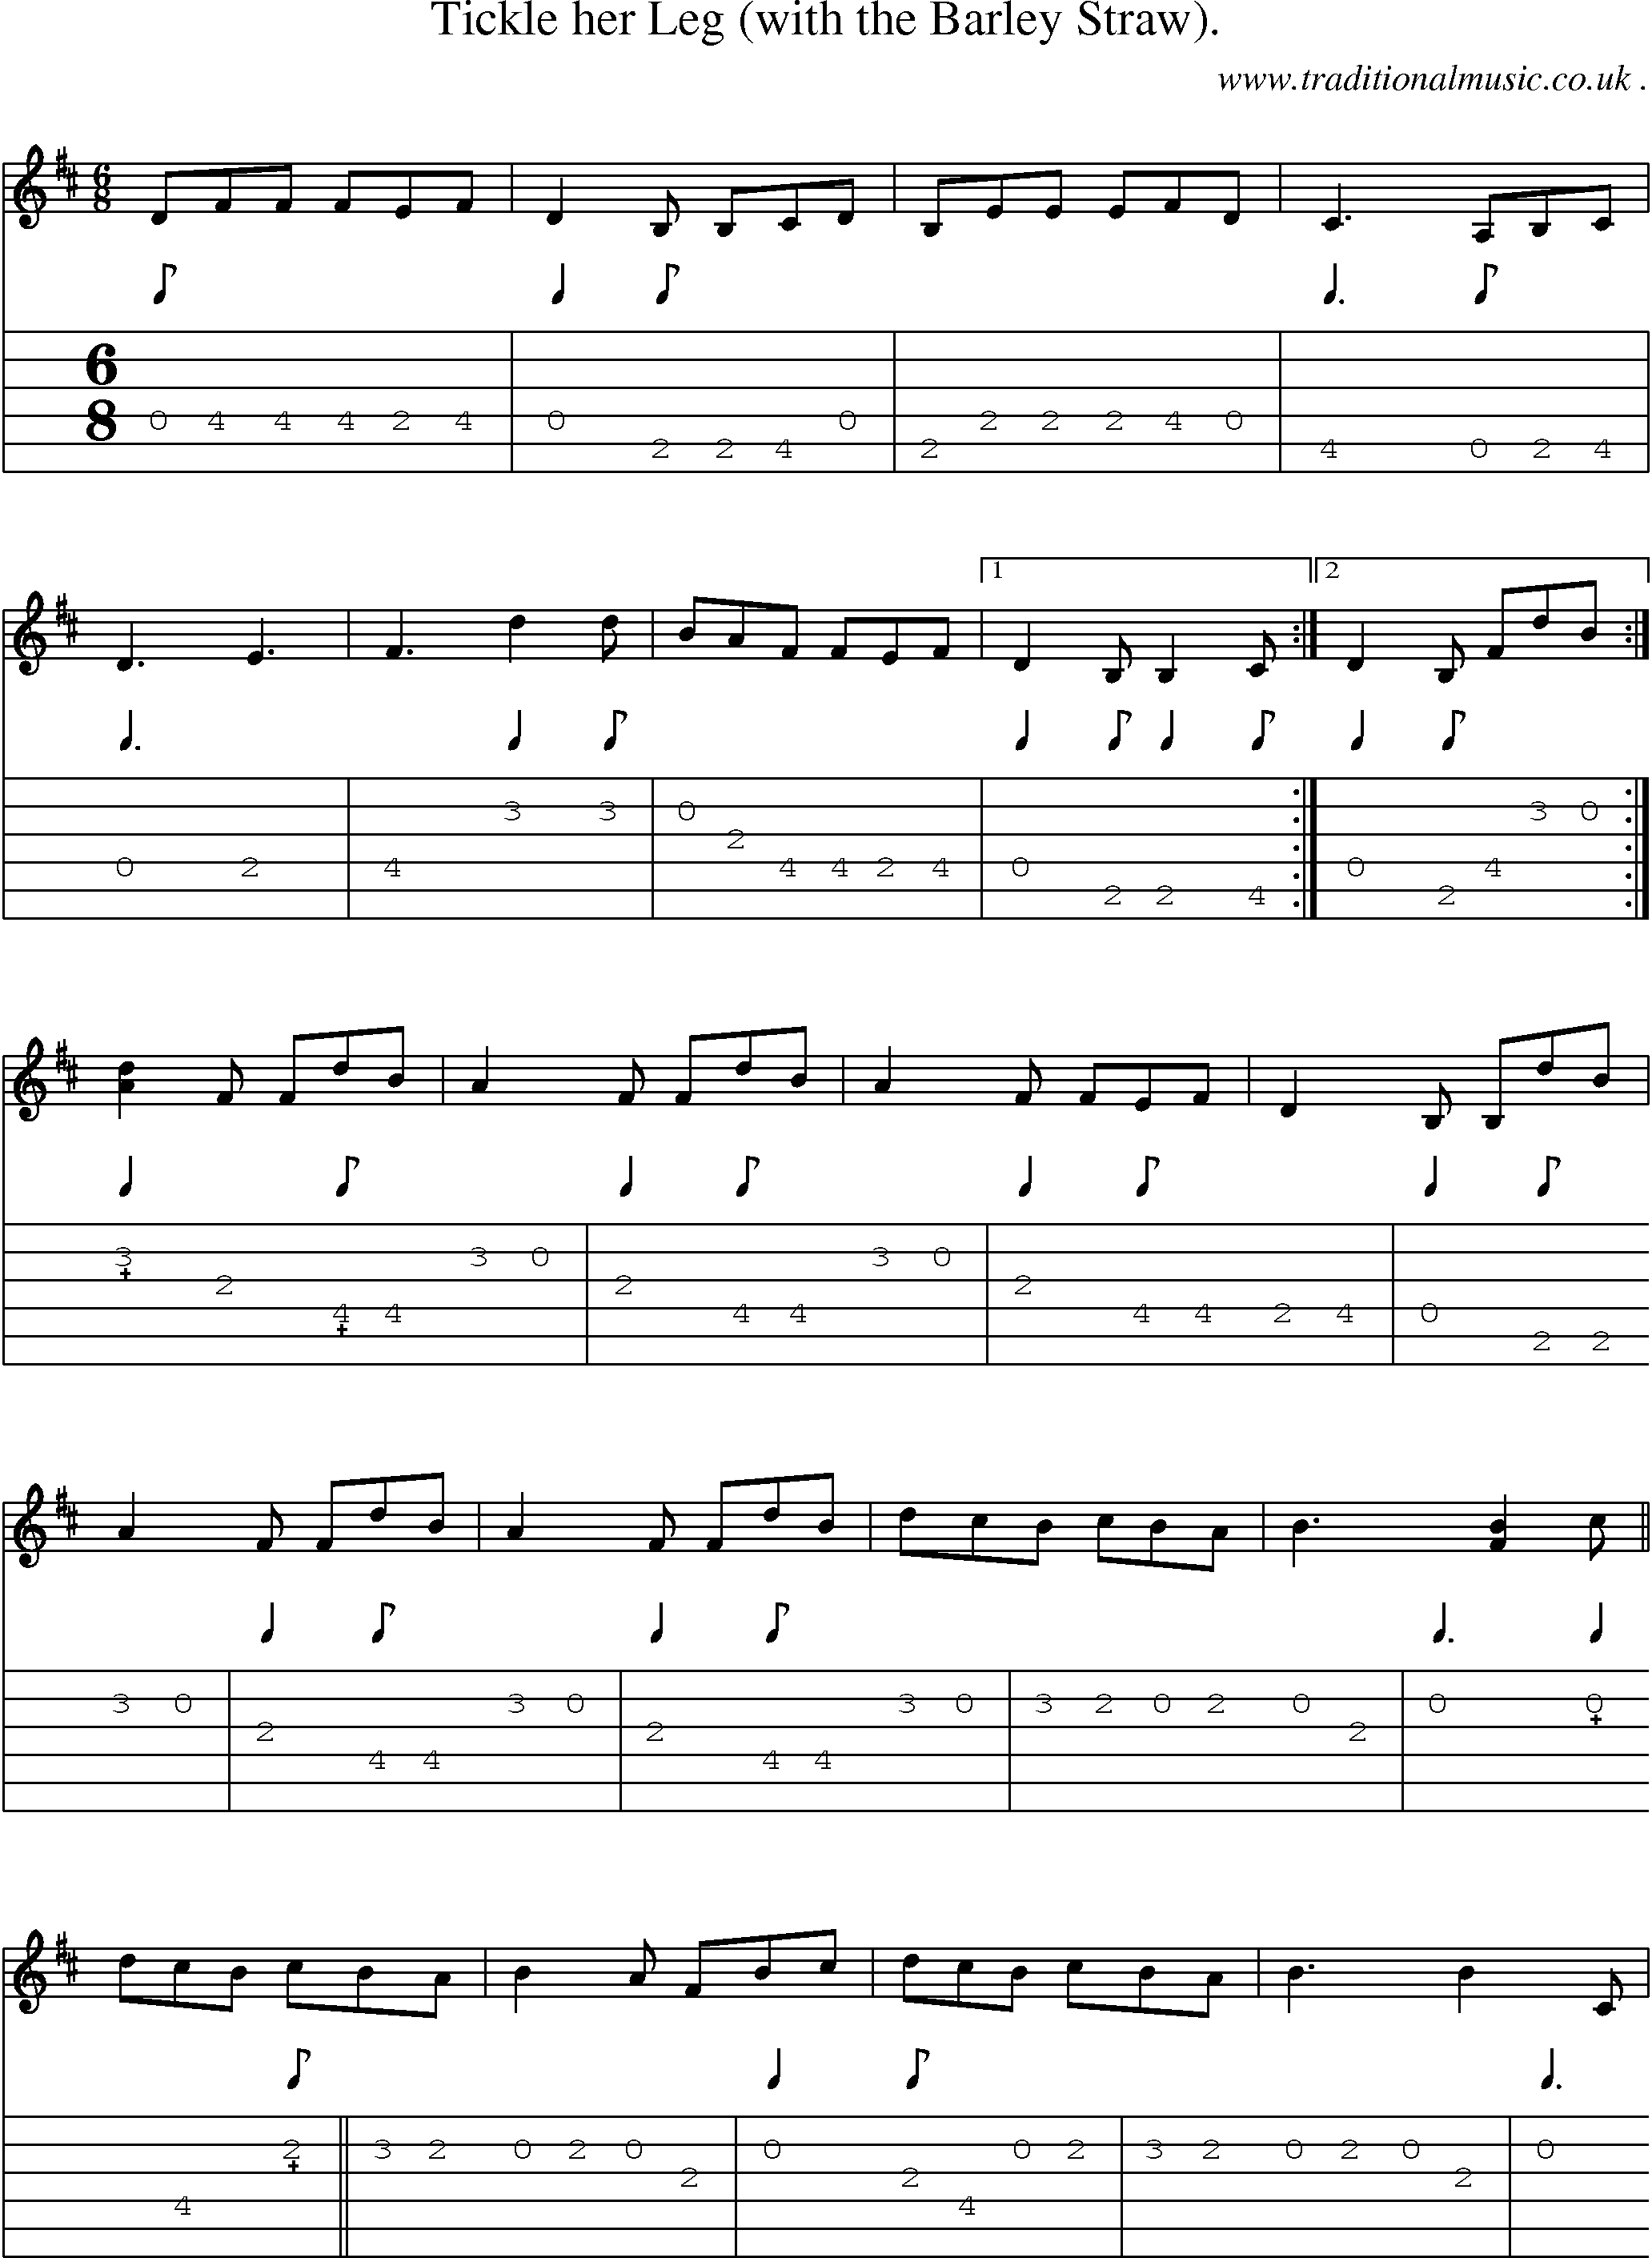 Sheet-Music and Guitar Tabs for Tickle Her Leg (with The Barley Straw)